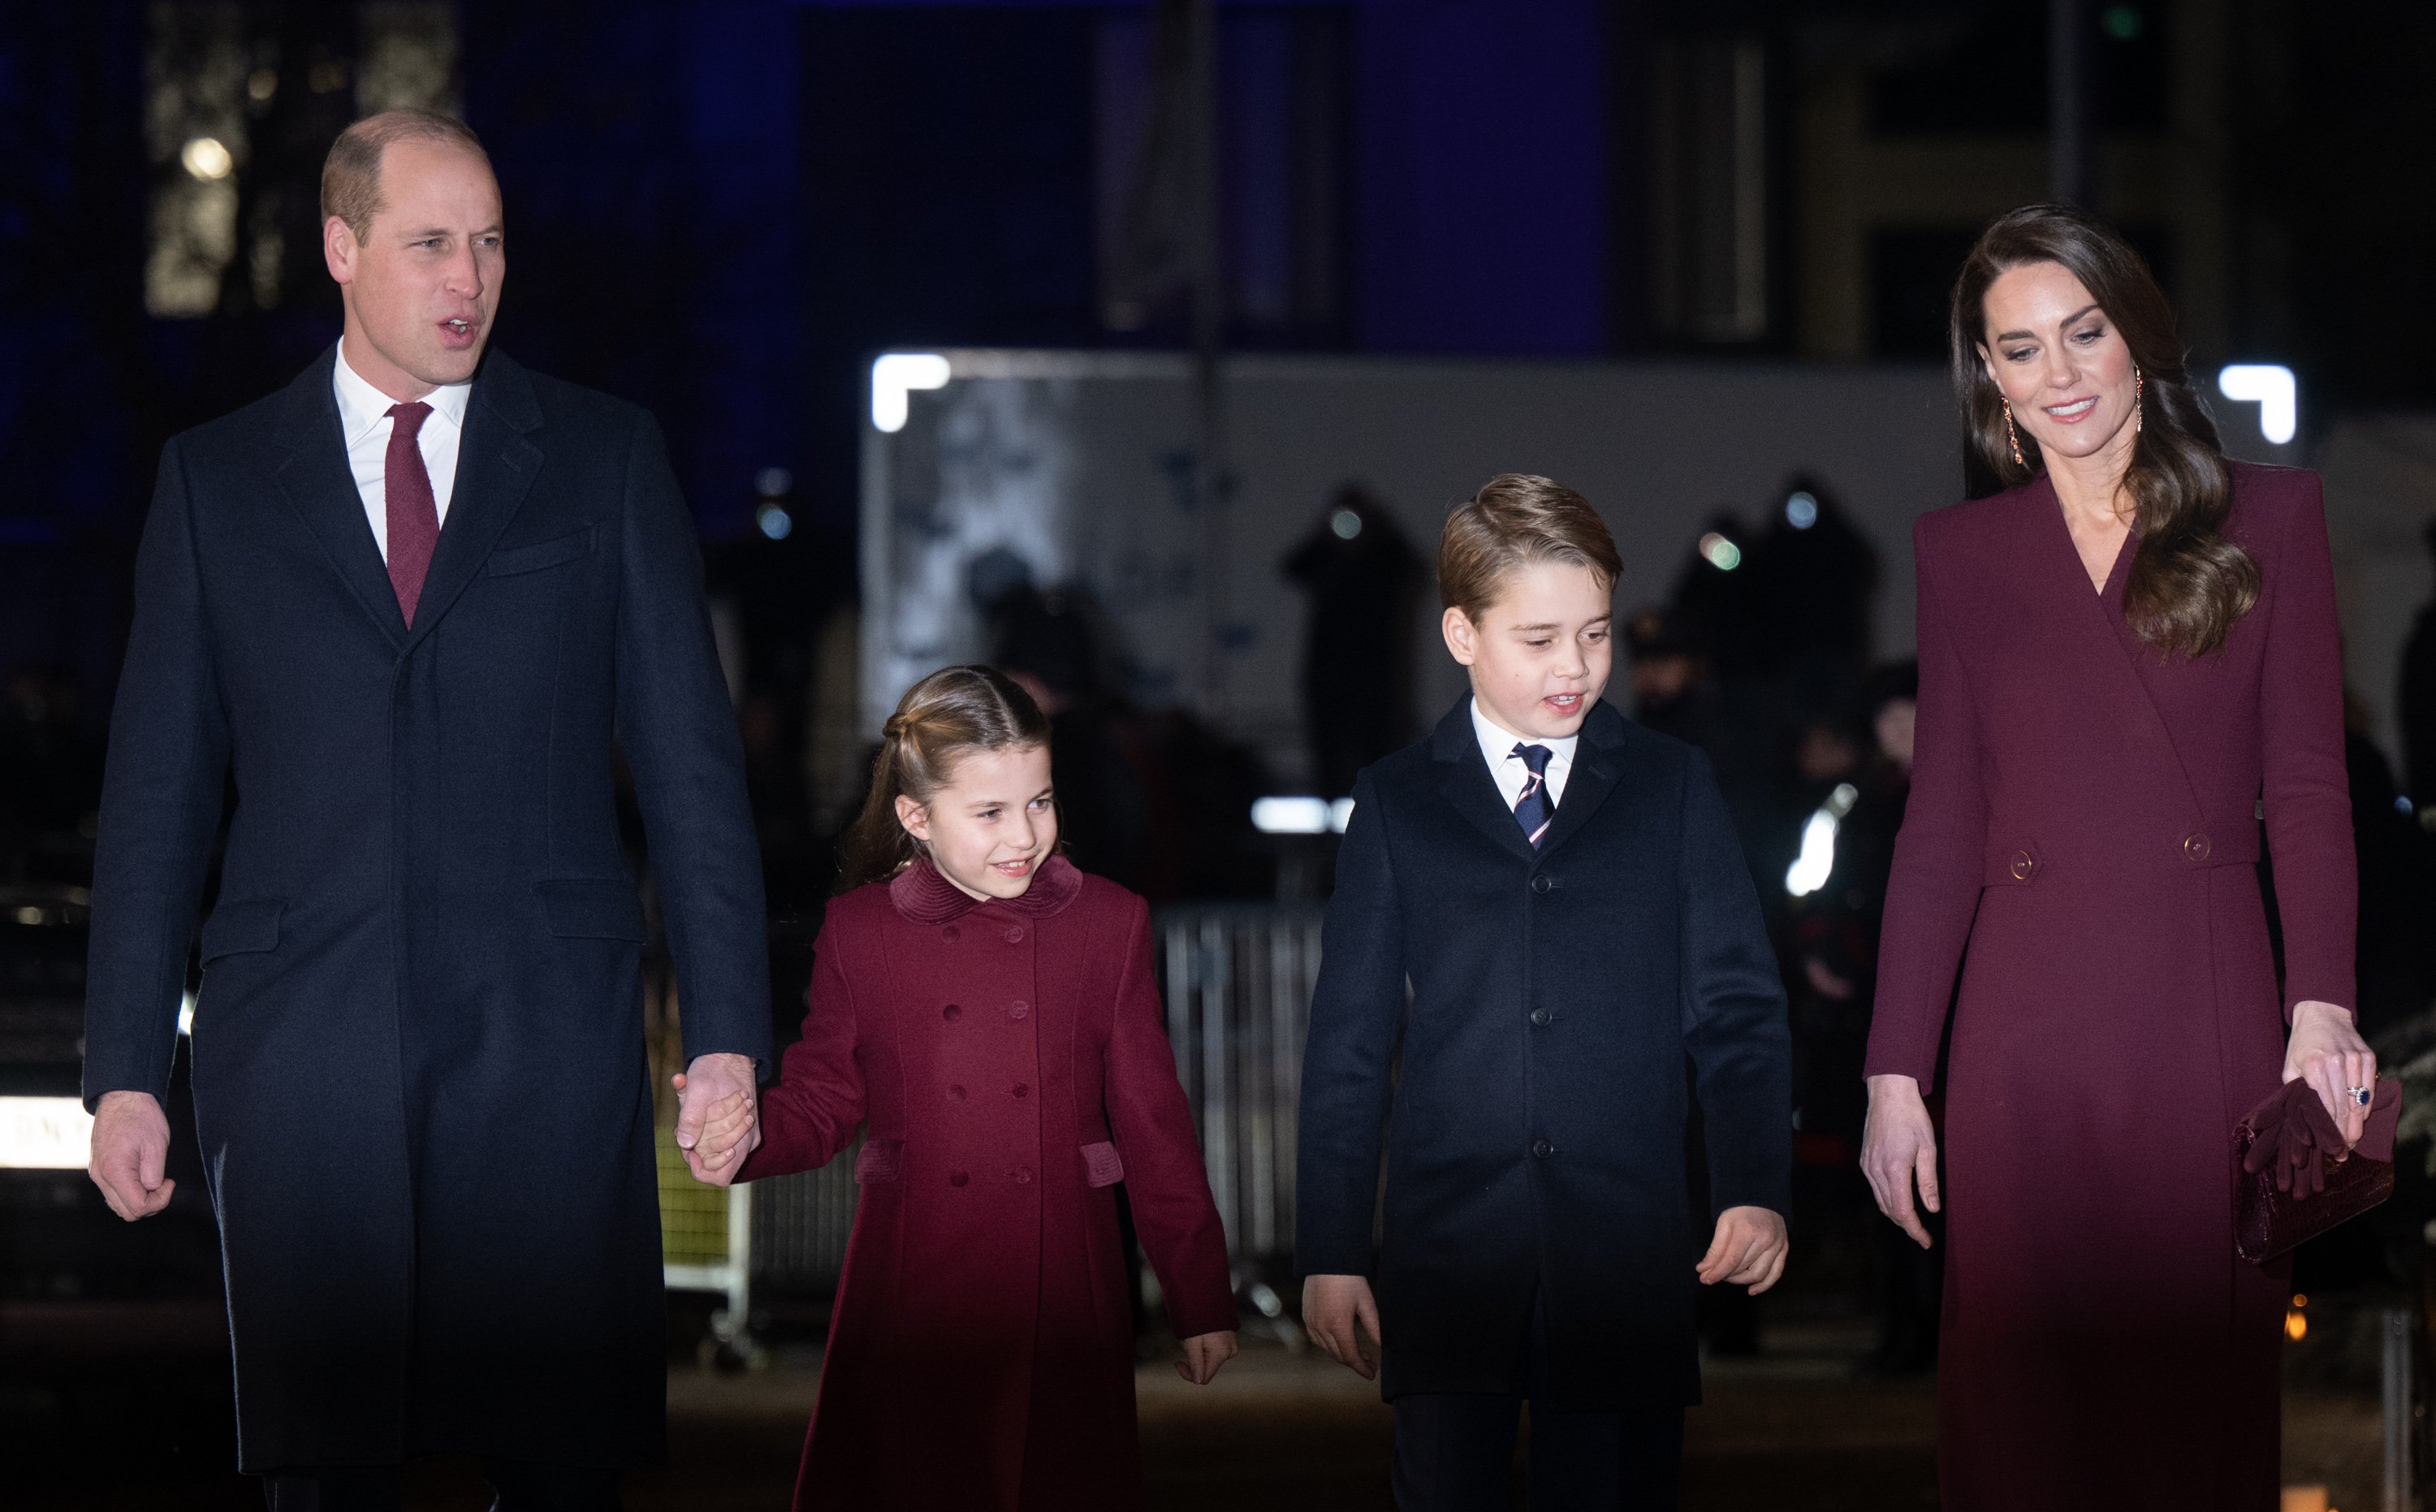 Prince William and Kate Middleton attend the Christmas concert with Prince George and Princess Charlotte.